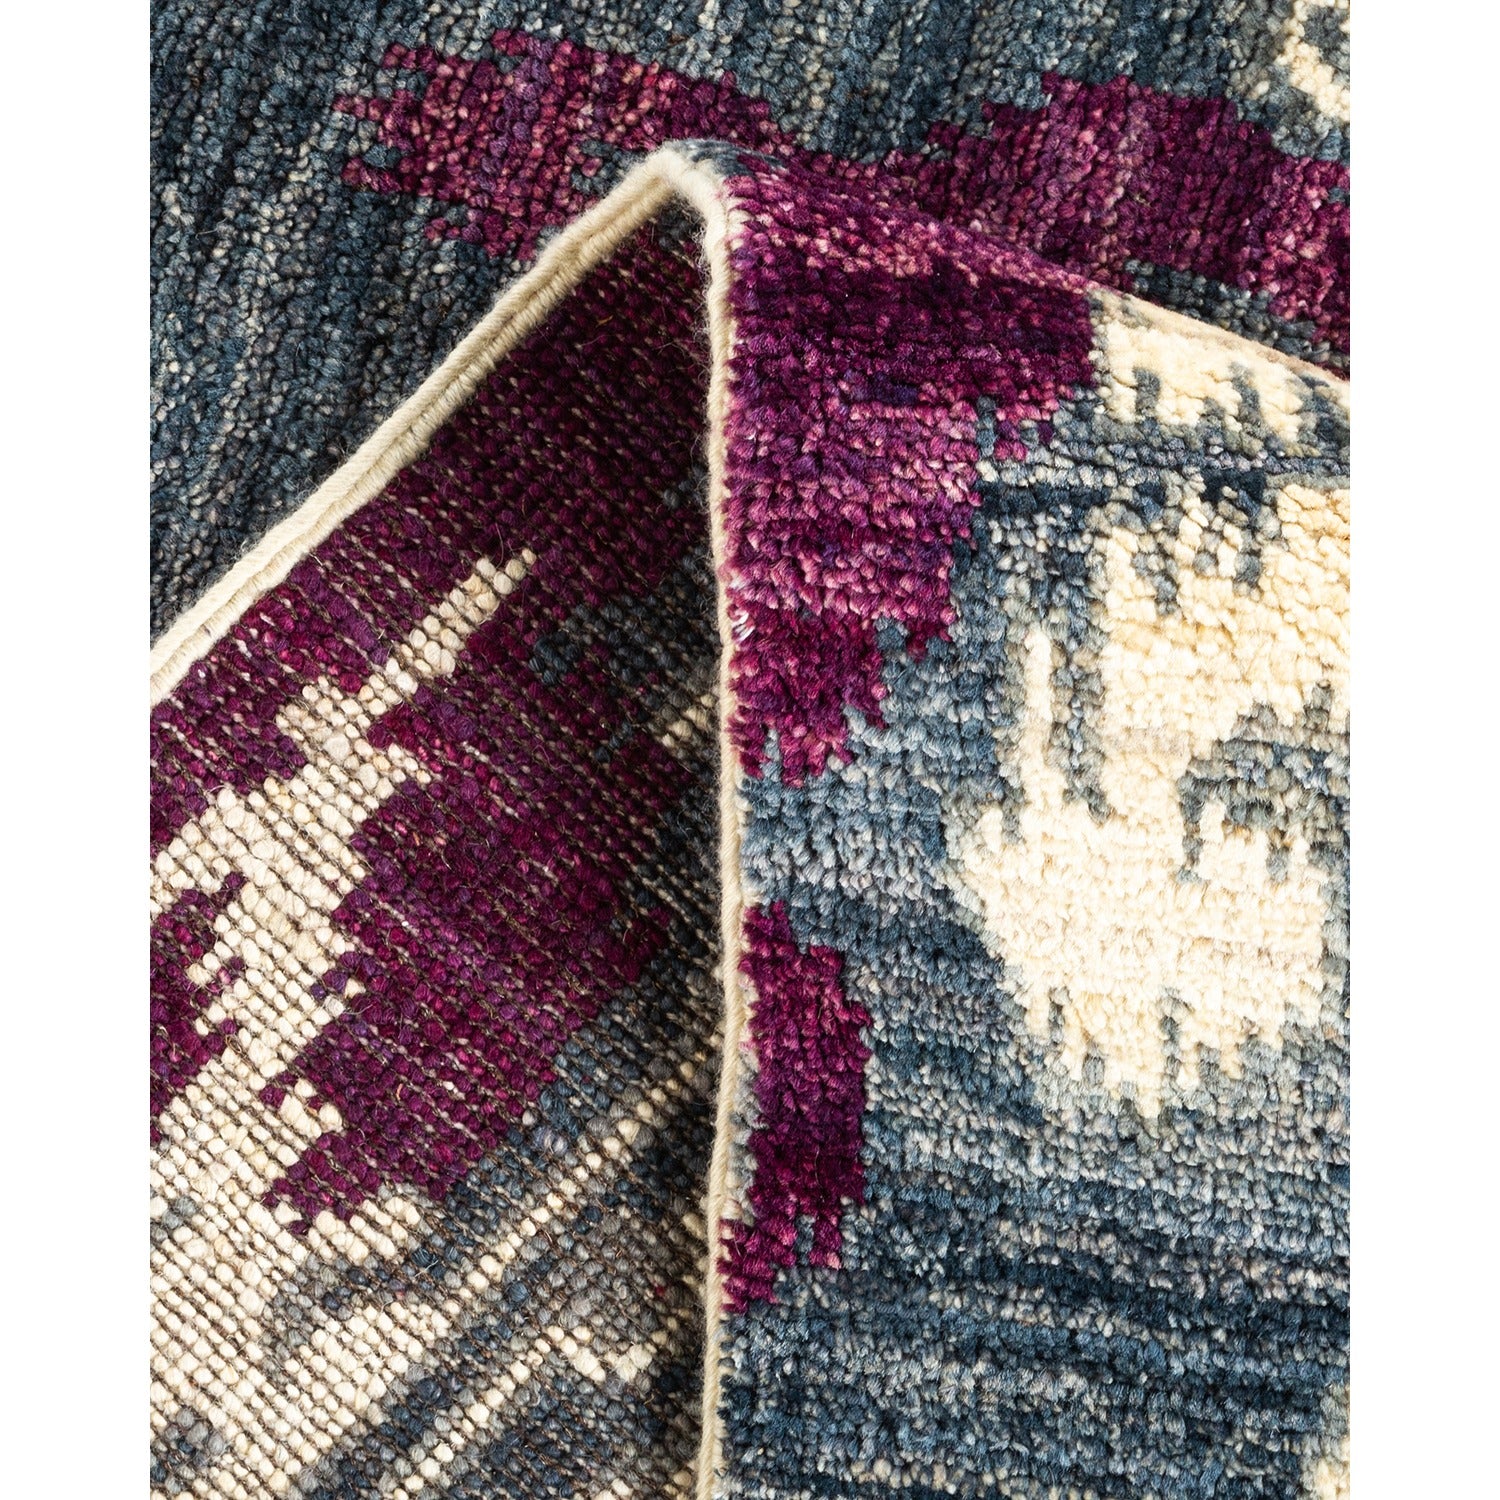 Intricate handcrafted rug showcases detailed texture and rich color palette.